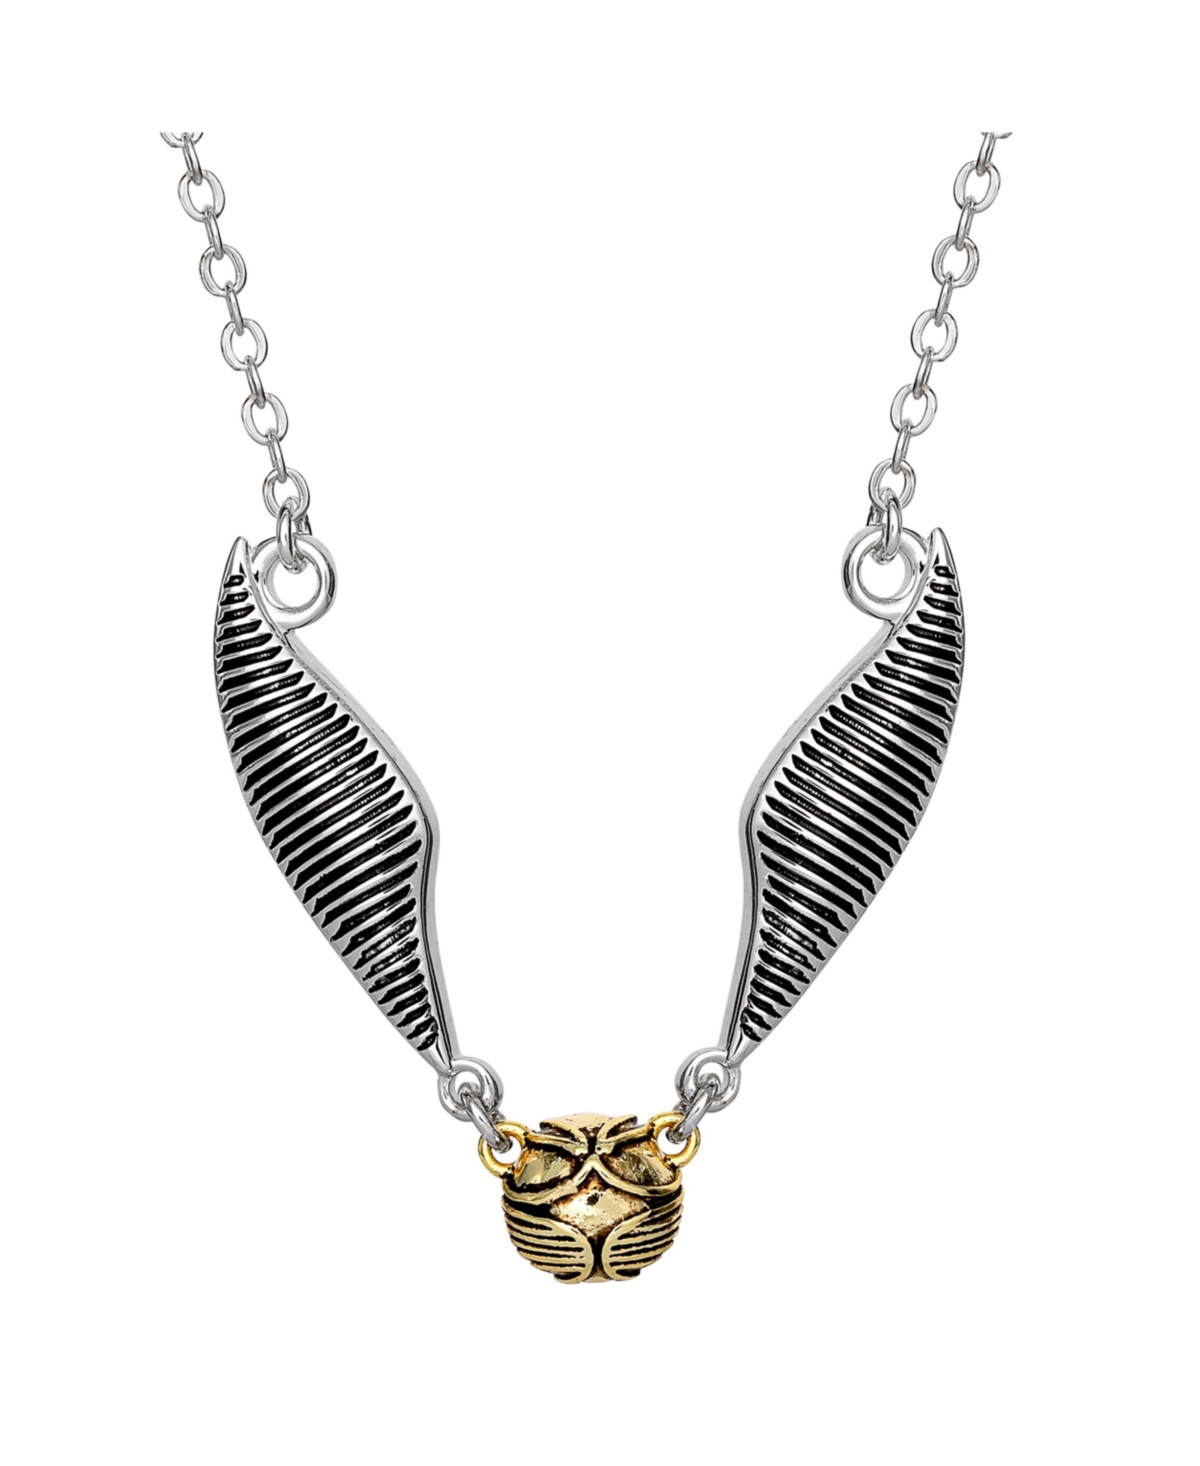 Womens Silver Plated Quidditch Golden Snitch Necklace, 16 + 2'' - Silver tone, gold tone